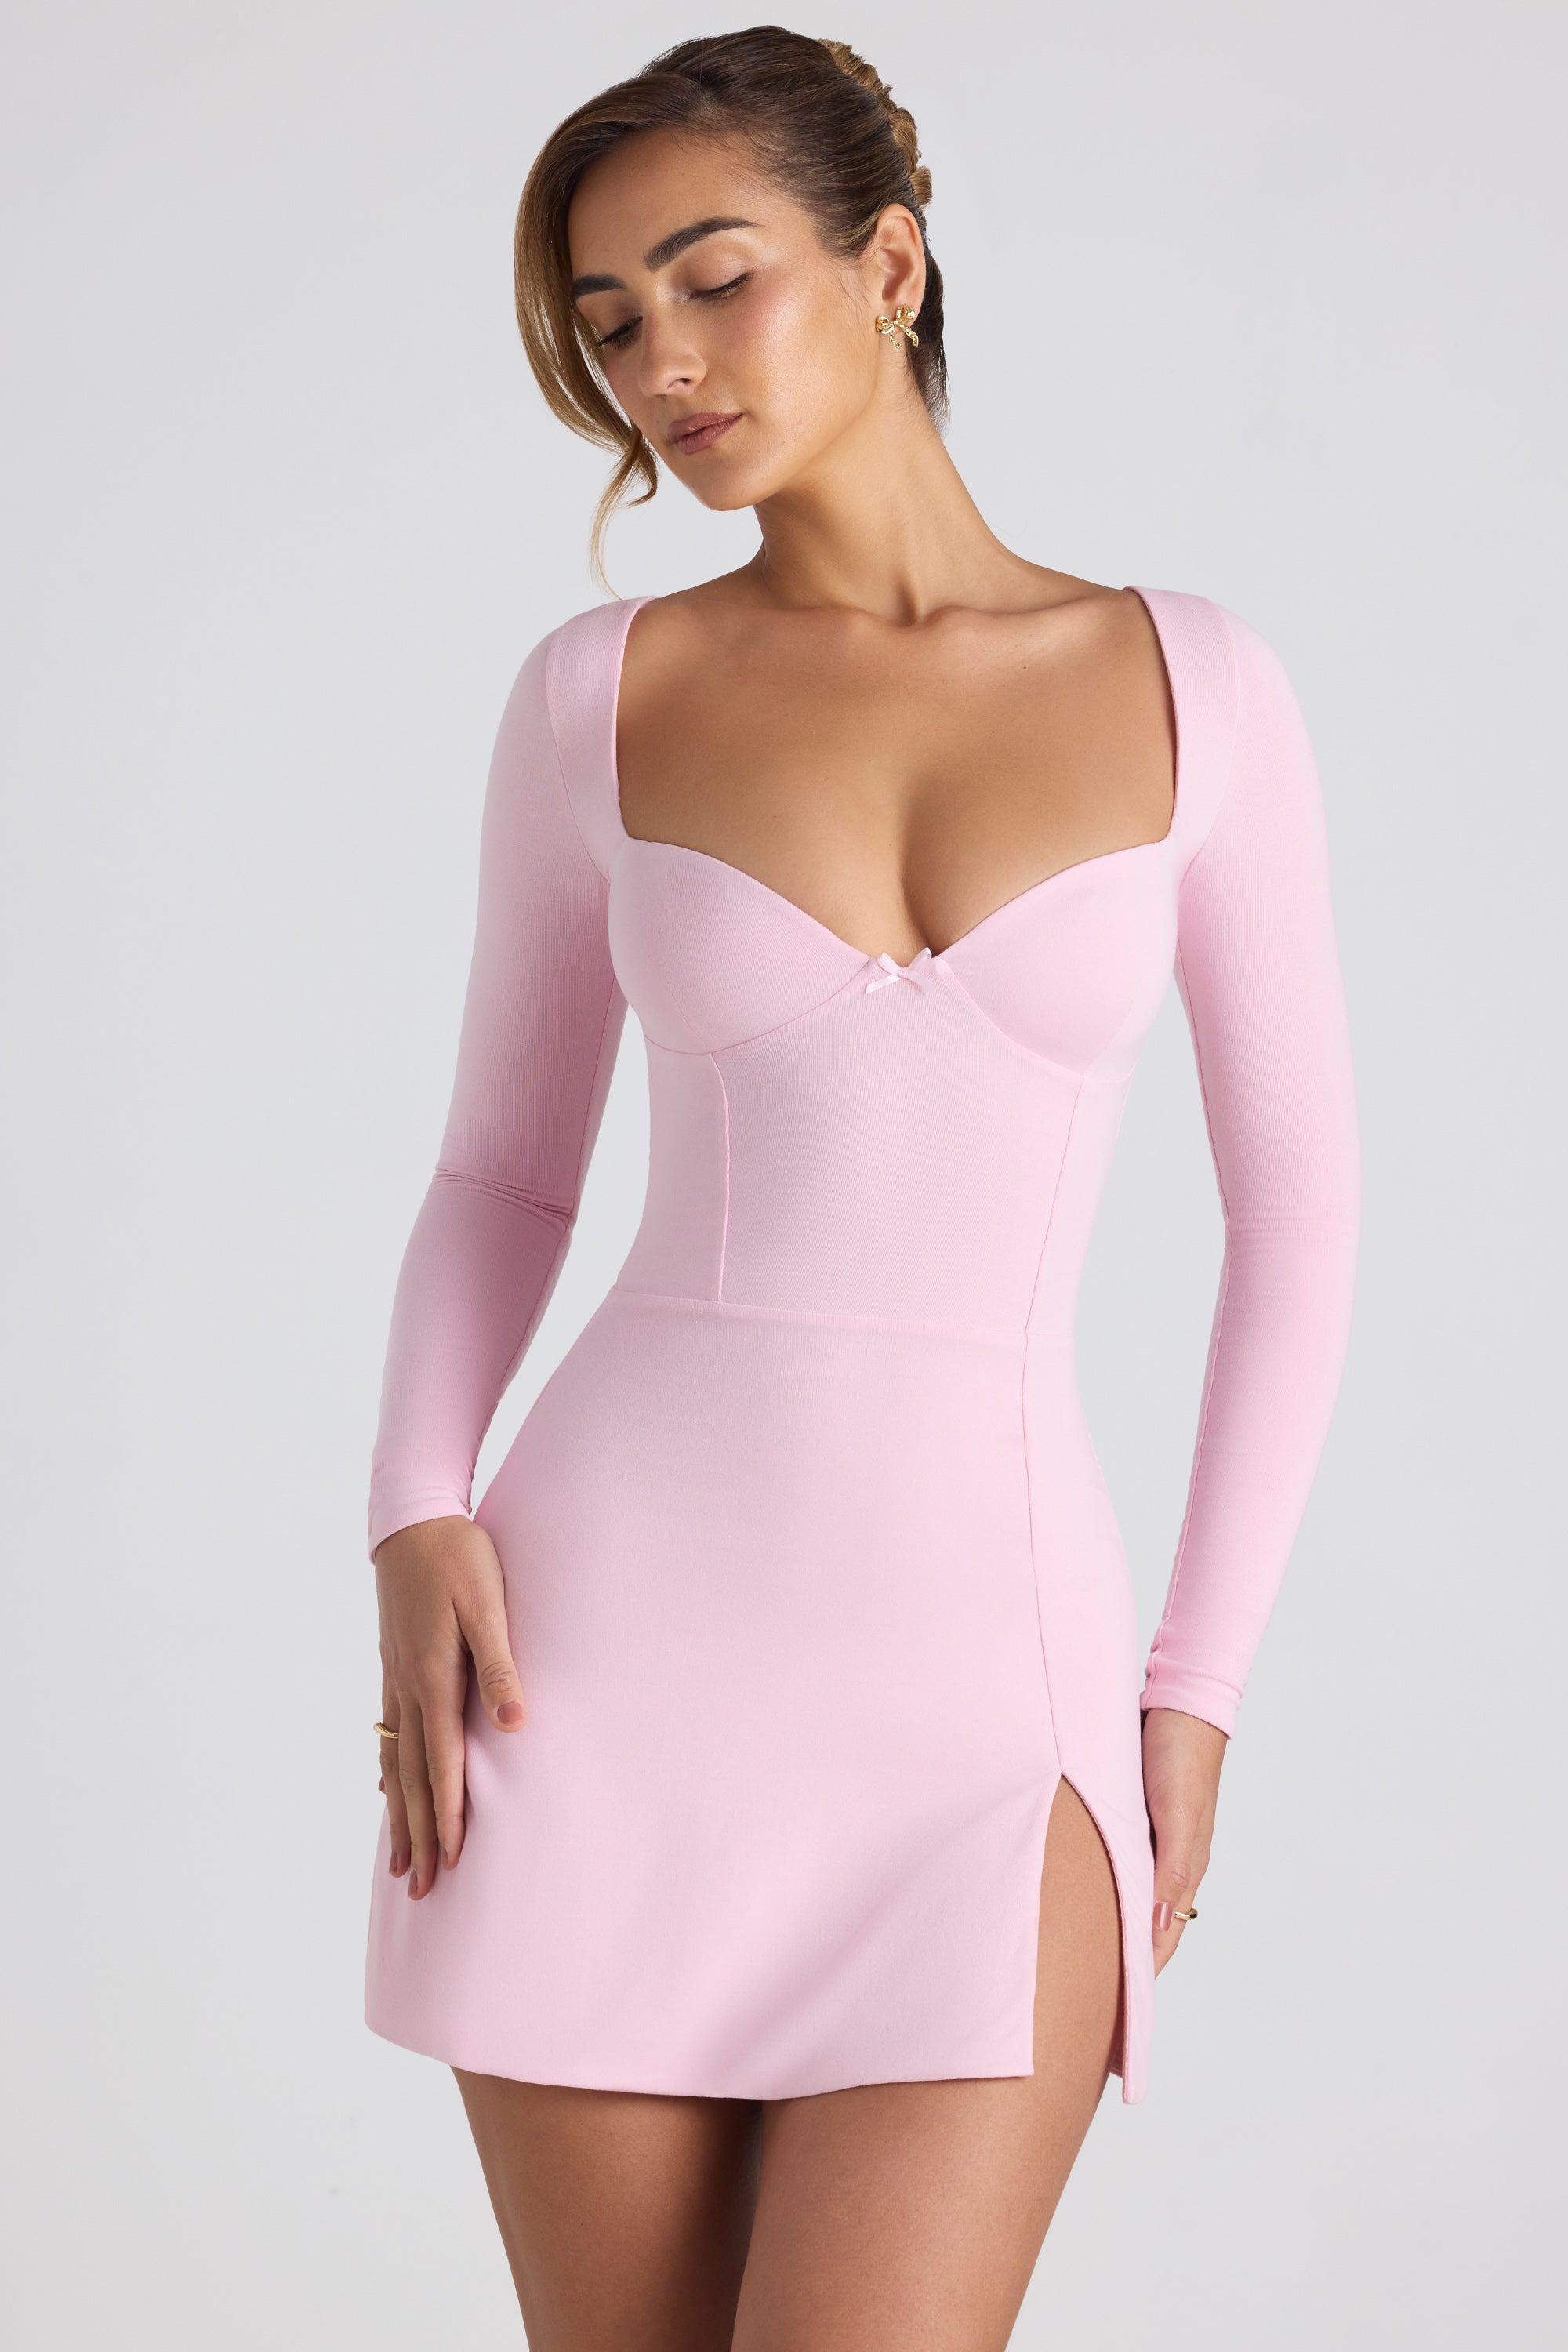 Stylish Pink Dress for a Cute K-Fashion Look